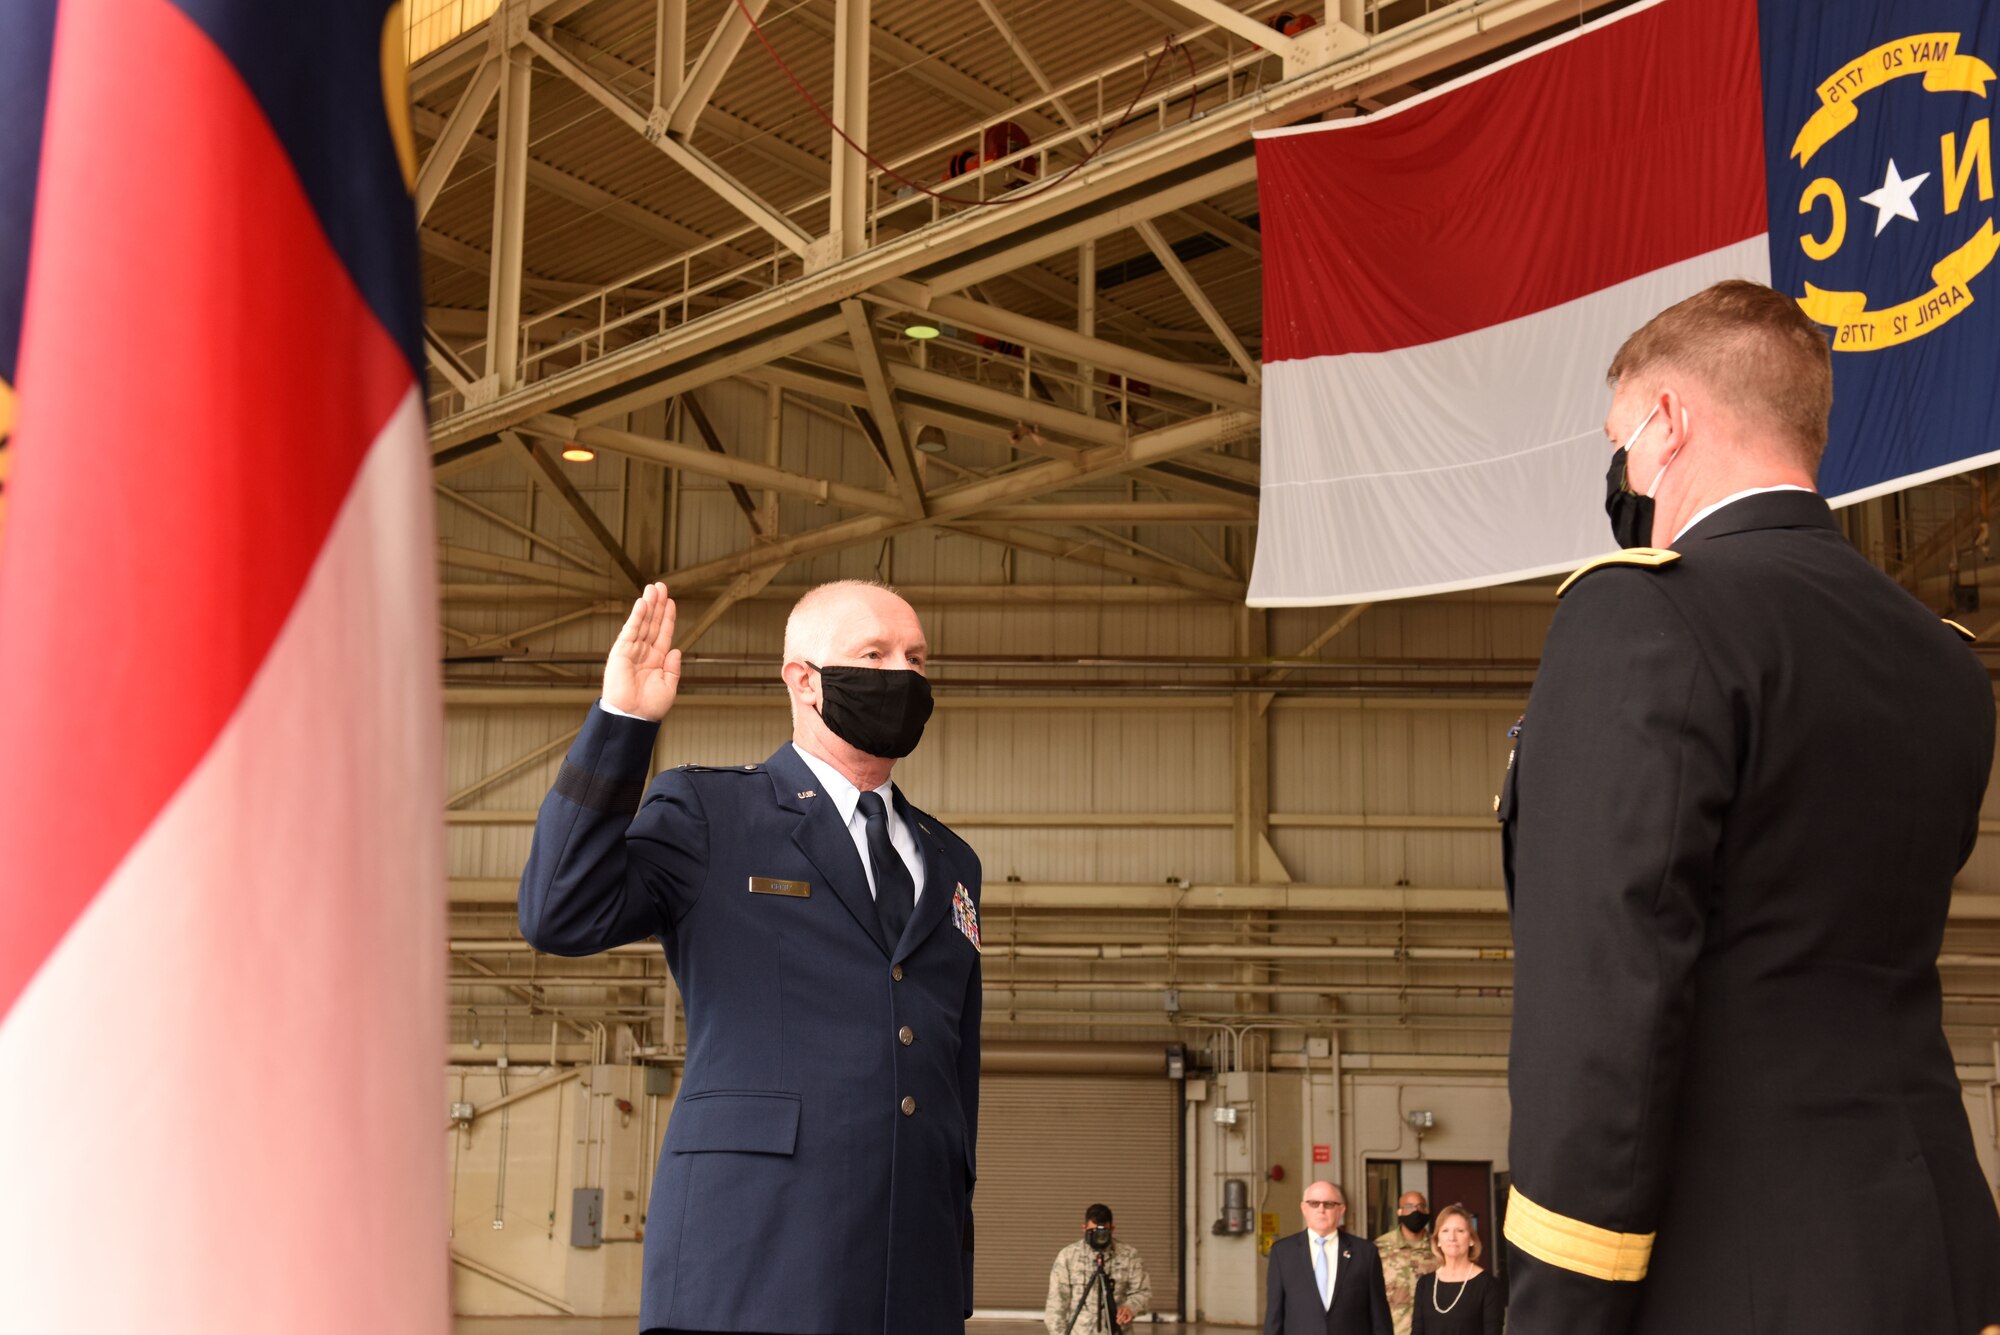 U.S. Army Maj. Gen. M. Todd Hunt (right), the Adjutant General of North Carolina National Guard (NCNG), leads U.S. Air Force Brig. Gen. Allan R. Cecil (left), NCNG Chief of Staff, in the reaffirmation of oath during Brig. Gen. Cecil’s promotion ceremony at the North Carolina Air National Guard Base, Charlotte Douglas International Airport, July 18, 2020. Family, friends, and guard members gather to watch Col. Cecil pin on the rank of Brigadier General.